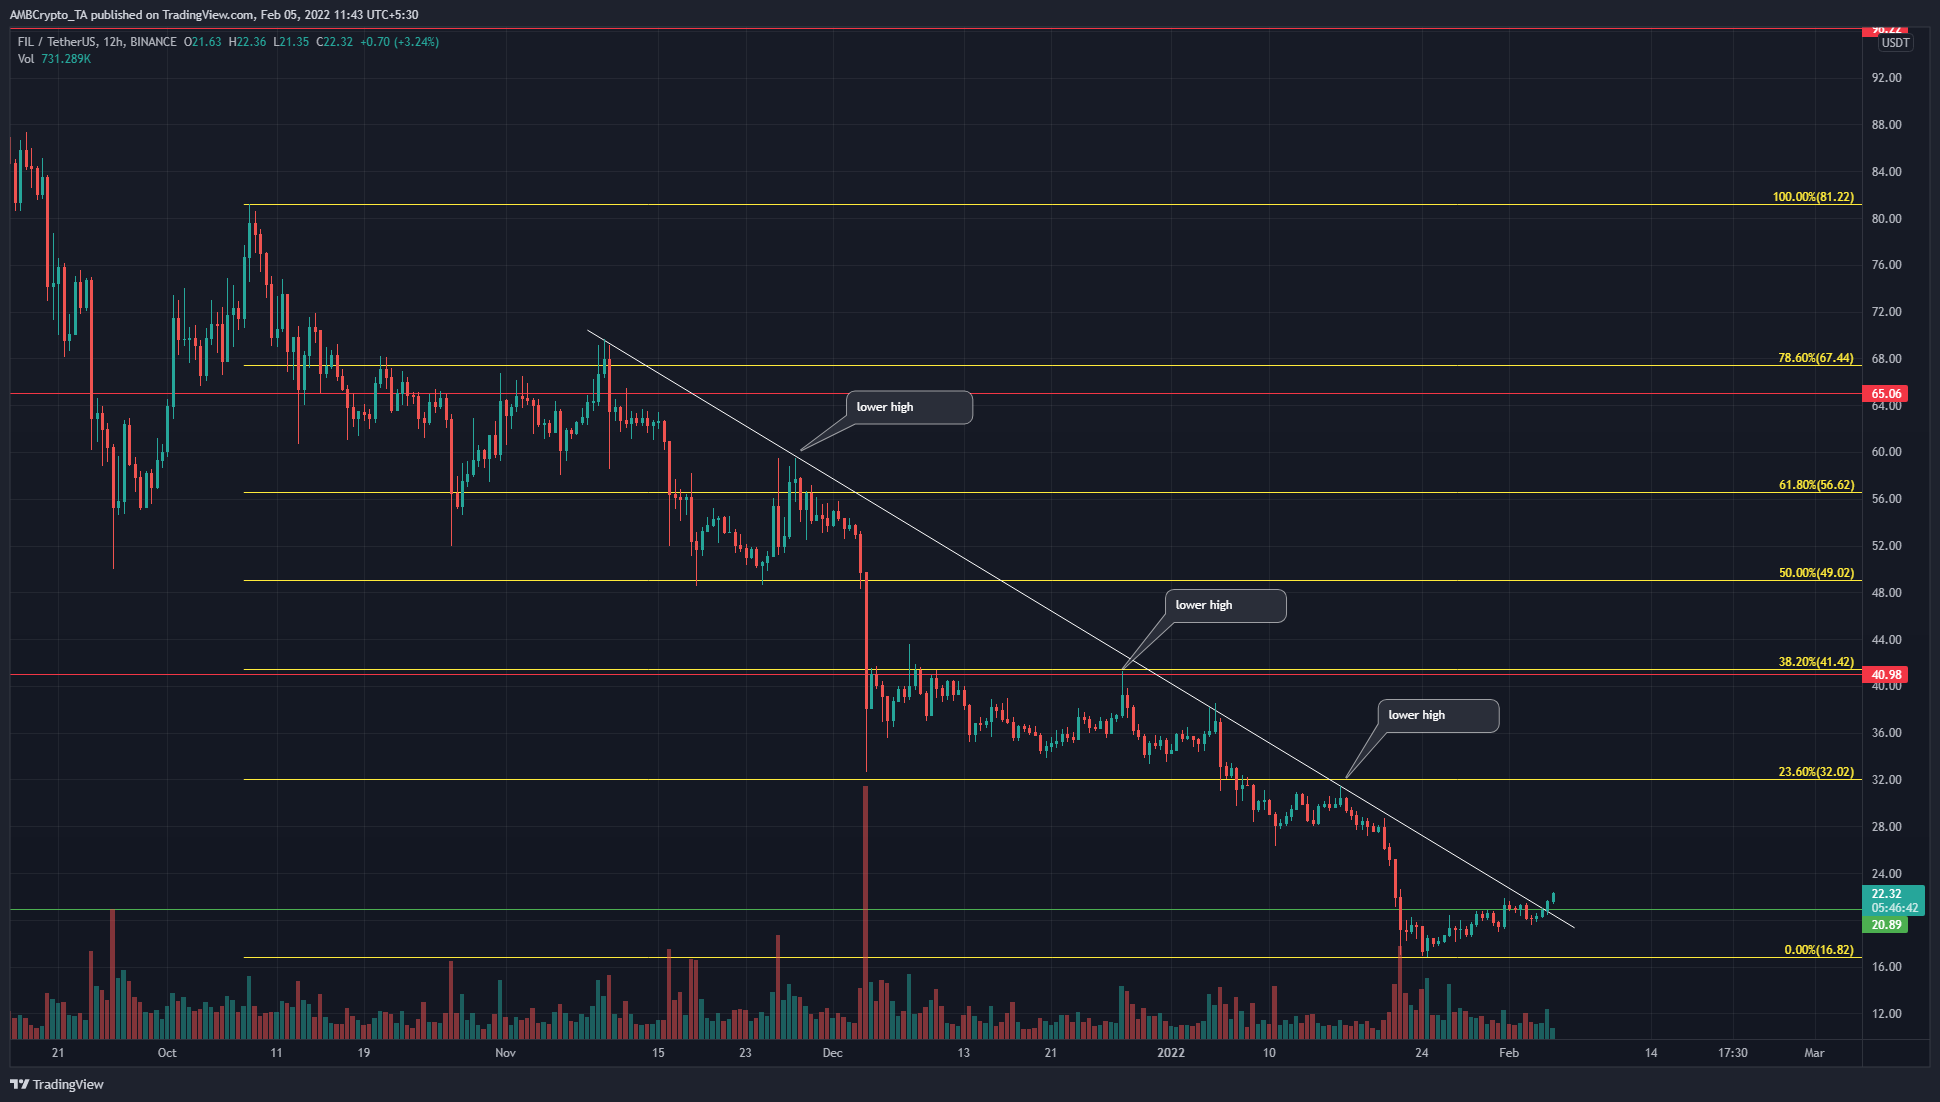 Filecoin has been on a relentless downtrend, keep an eye on this level